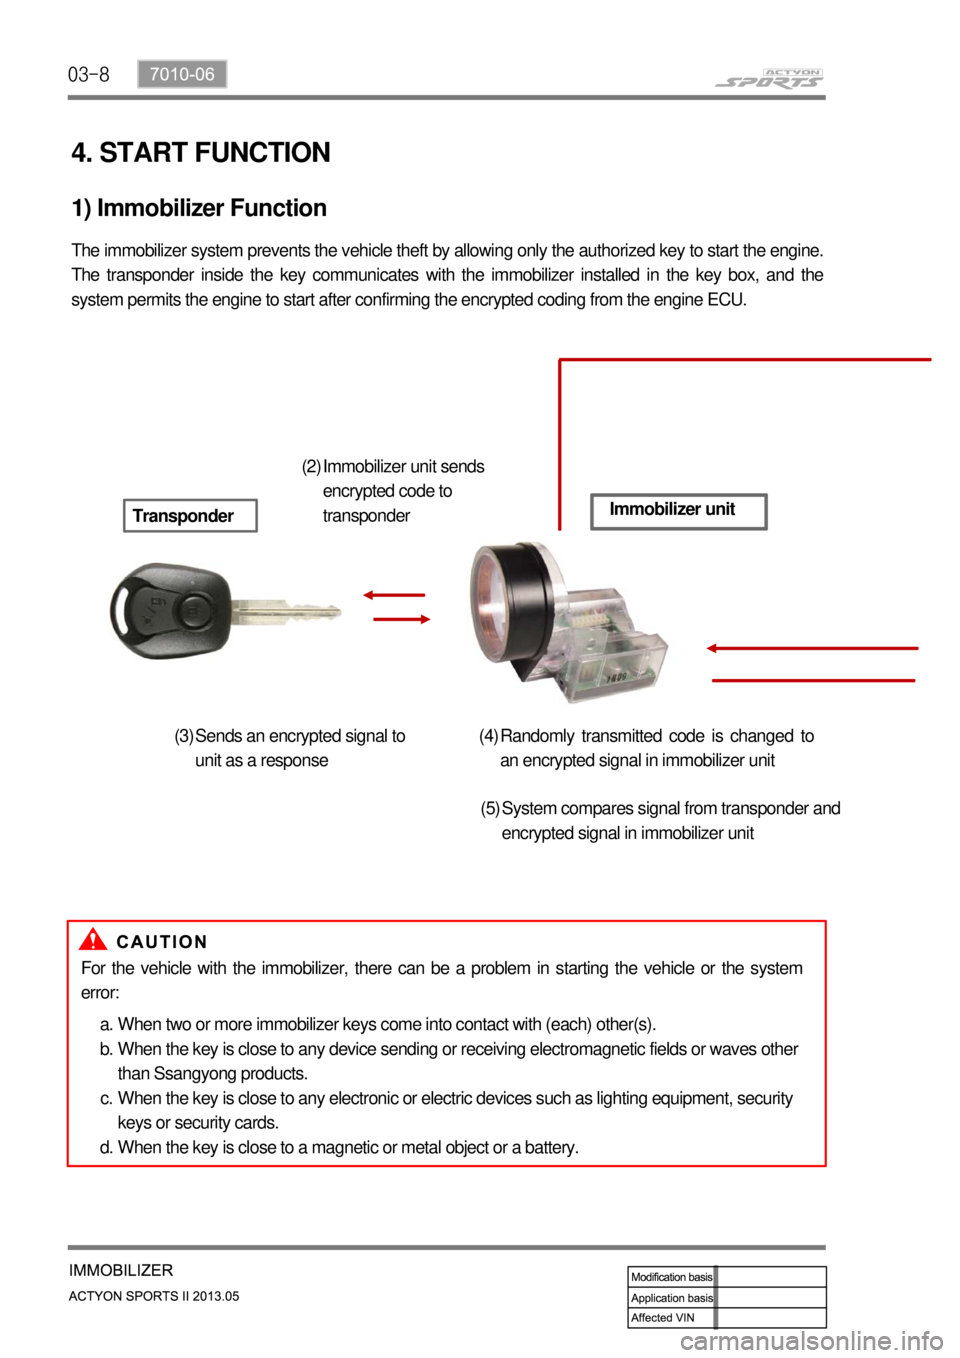 SSANGYONG NEW ACTYON SPORTS 2013  Service Manual 03-8
4. START FUNCTION
1) Immobilizer Function 
The immobilizer system prevents the vehicle theft by allowing only the authorized key to start the engine. 
The transponder inside the key communicates 